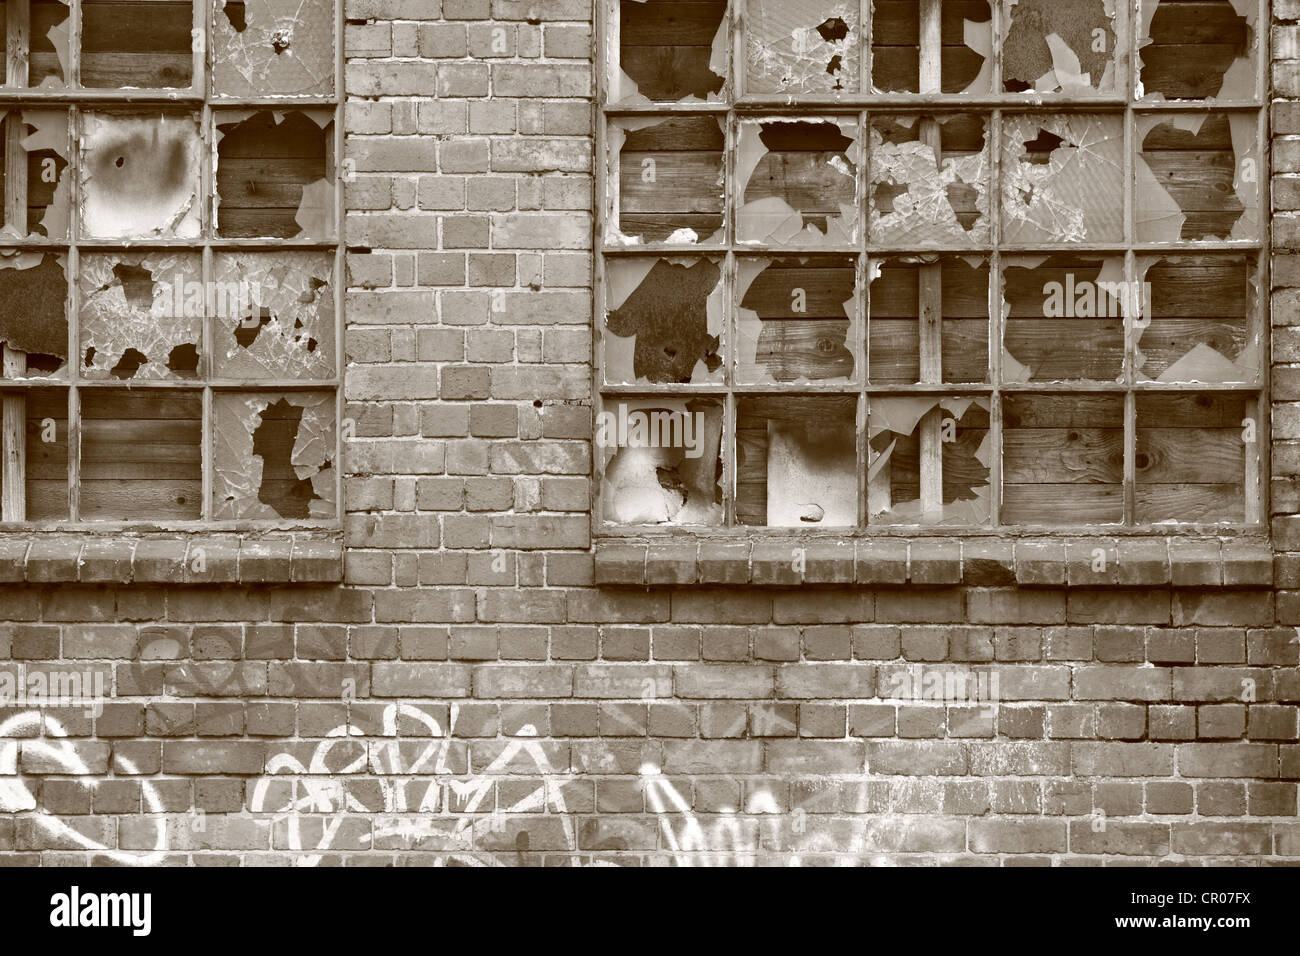 part of a derelict building with graffiti on the wall and broken windows Stock Photo